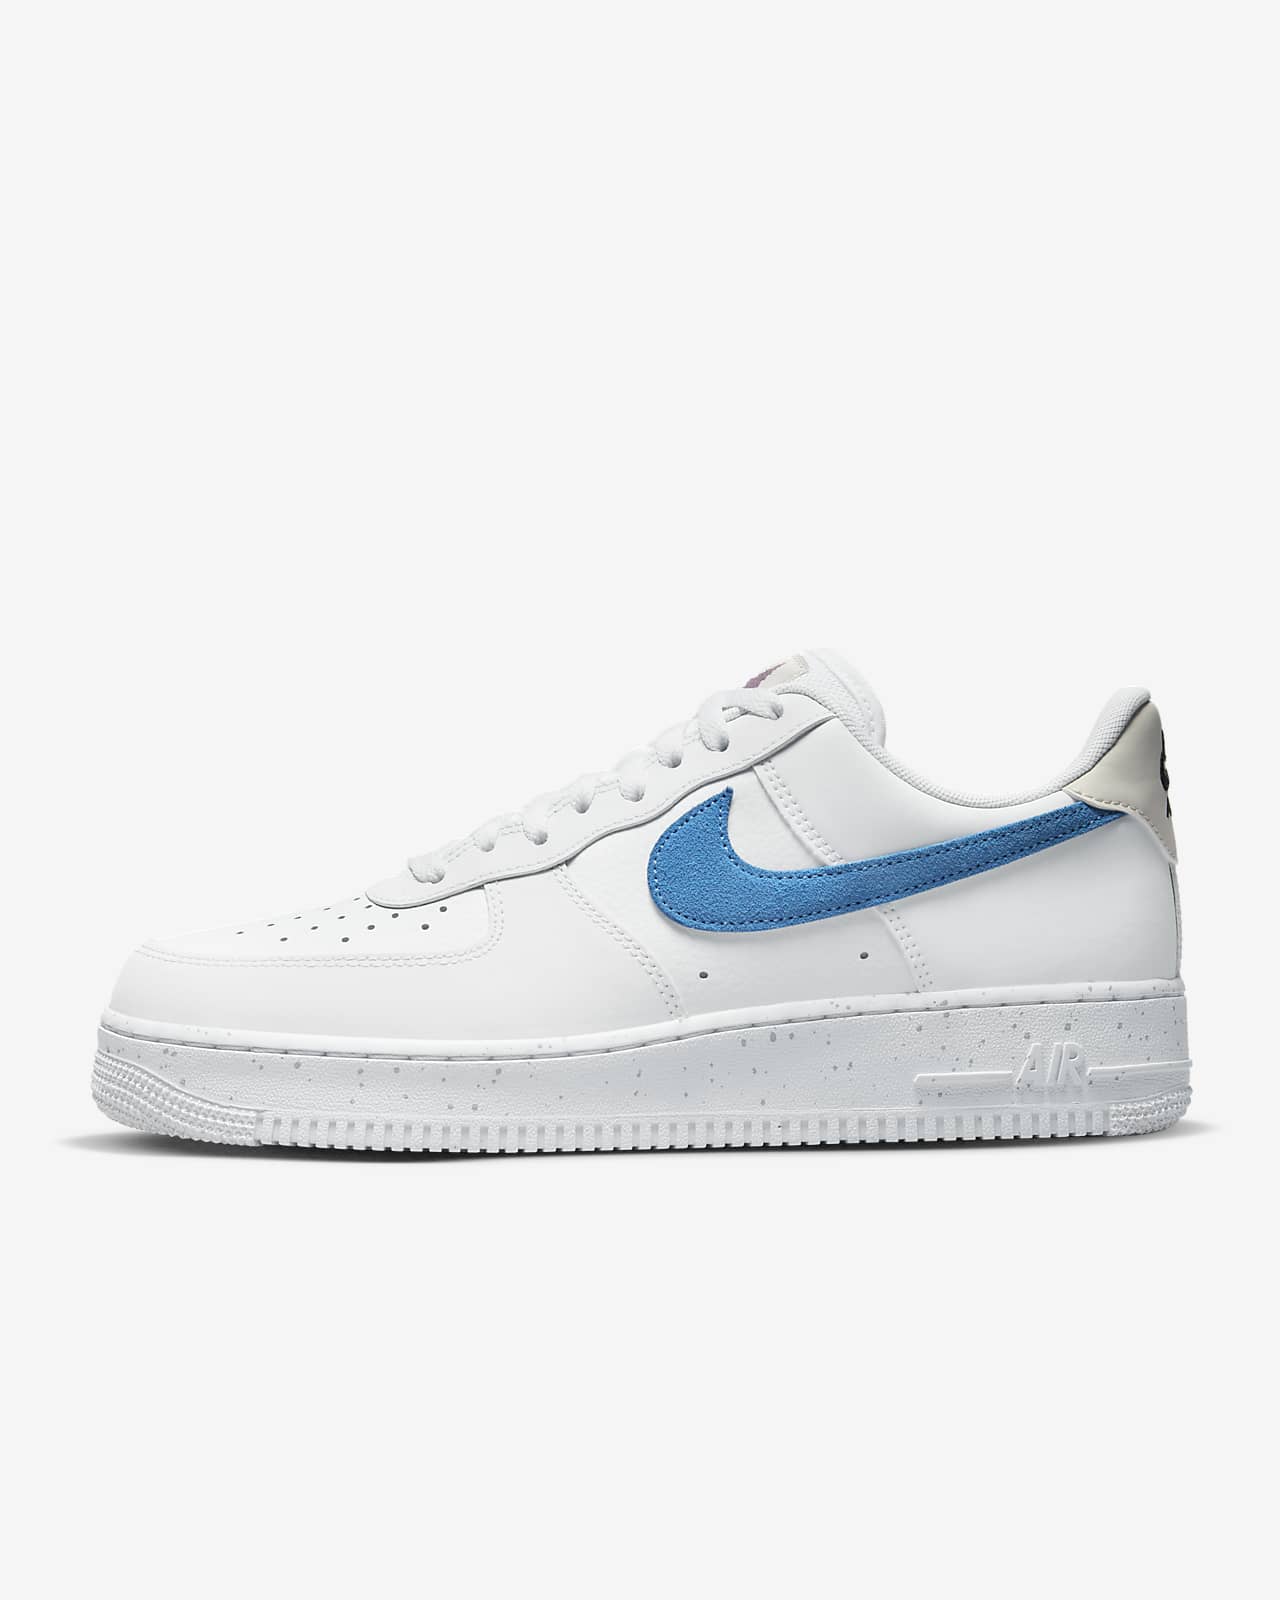 Chaussures Nike Air Force 1 '07 pour Homme